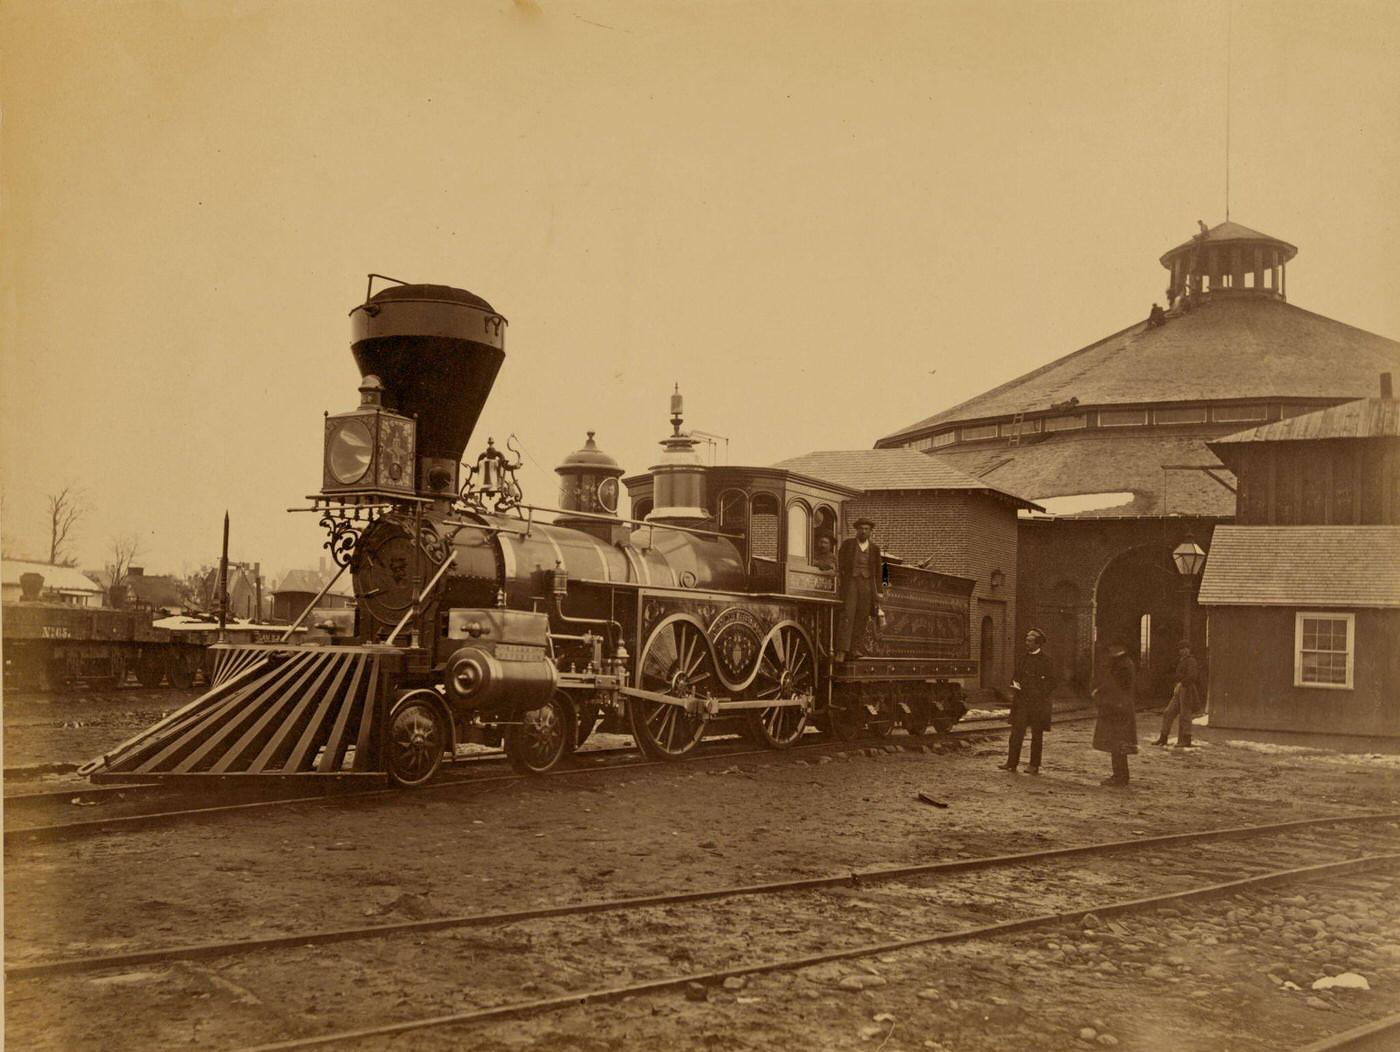 Ornately decorated locomotive J.H. Devereux, of the United States Military Railroad with two crew members on board outside the roundhouse at the Alexandria station, 1863